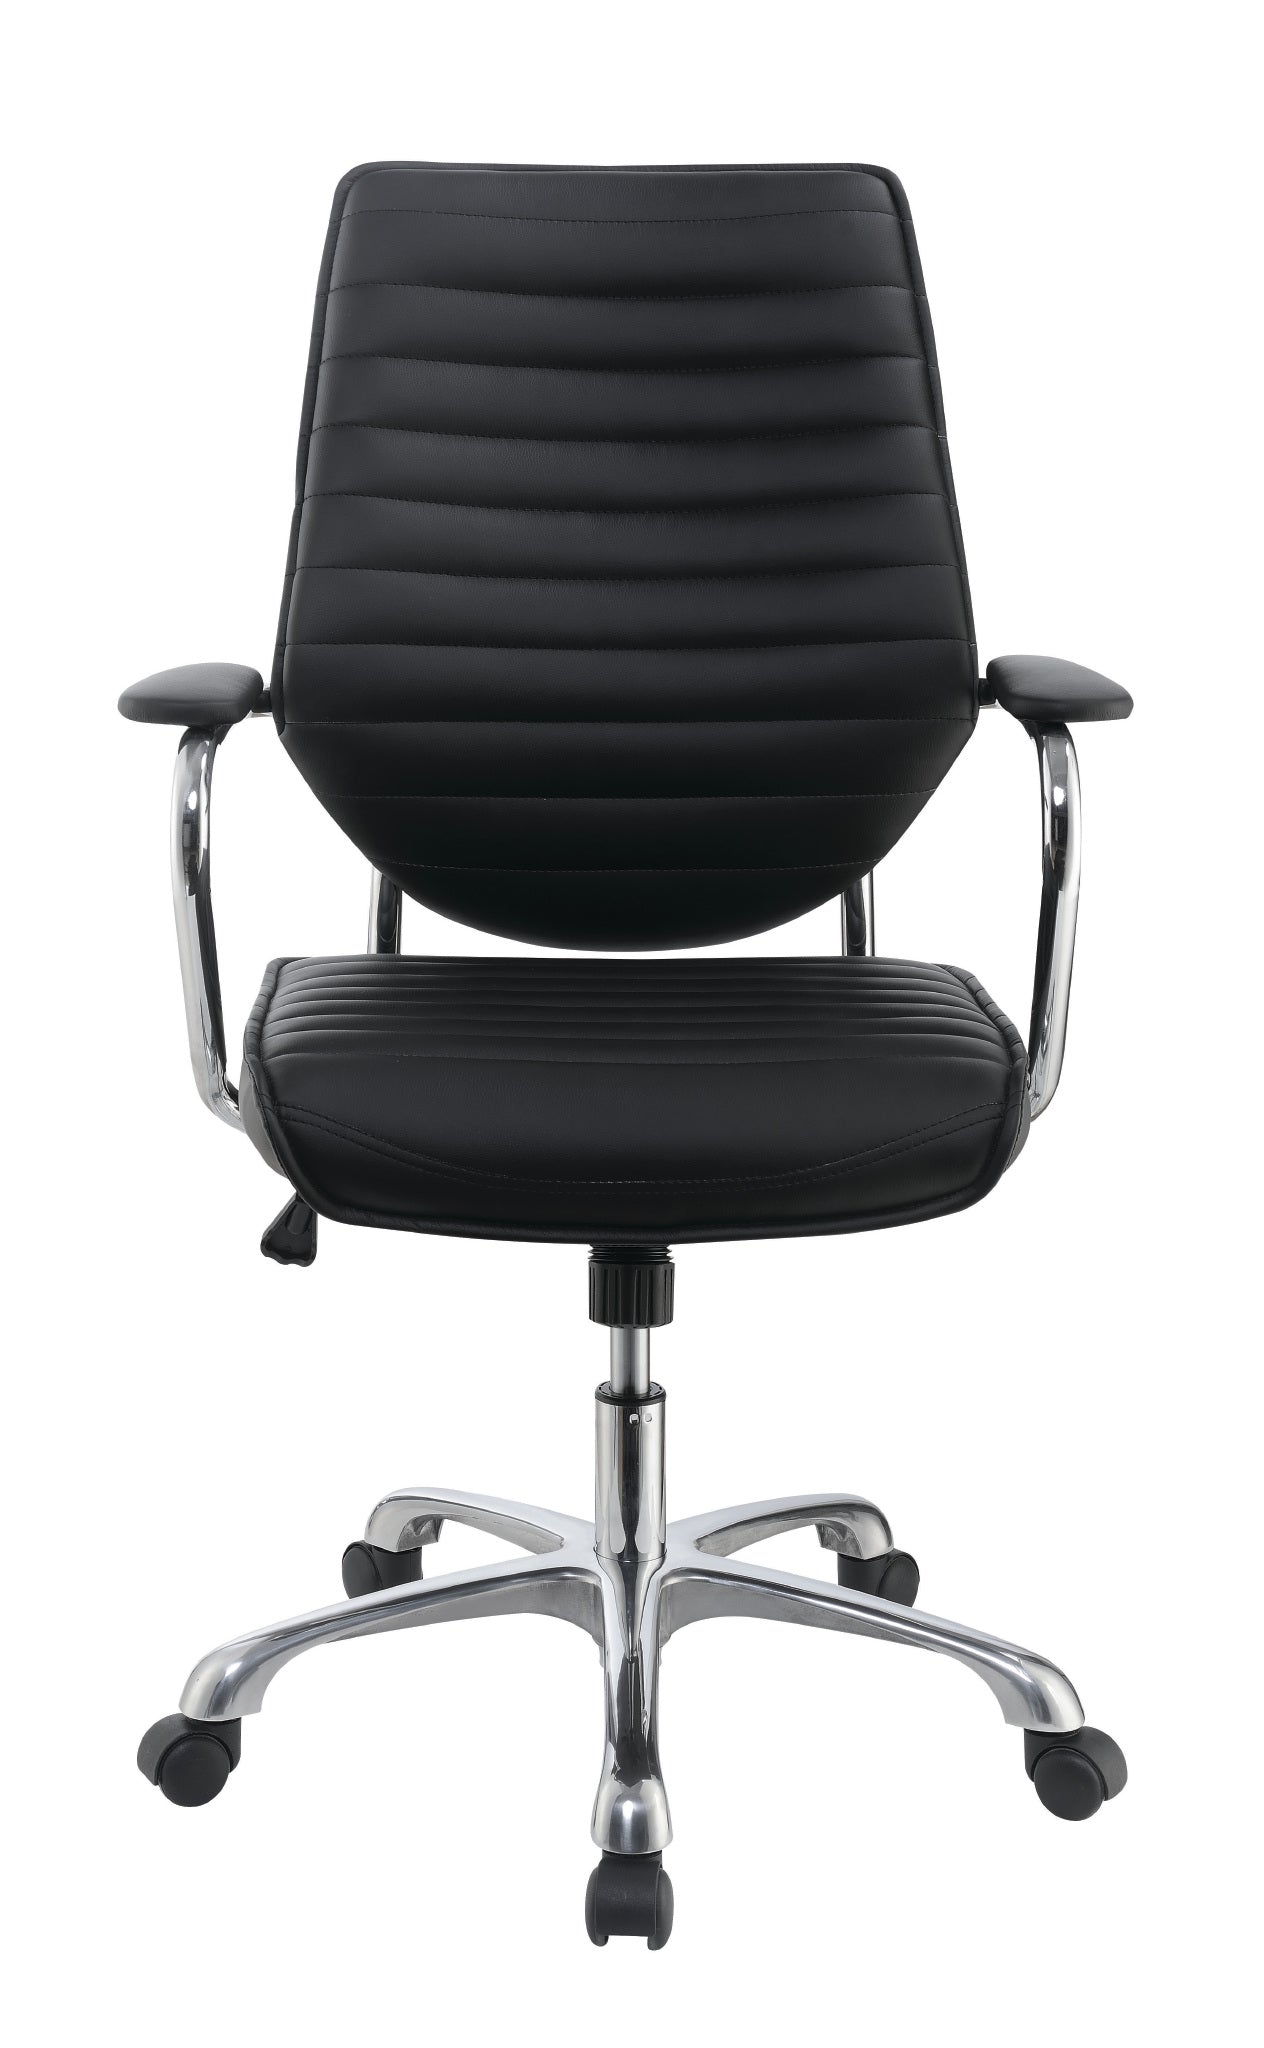 OF2182 - Office Chair